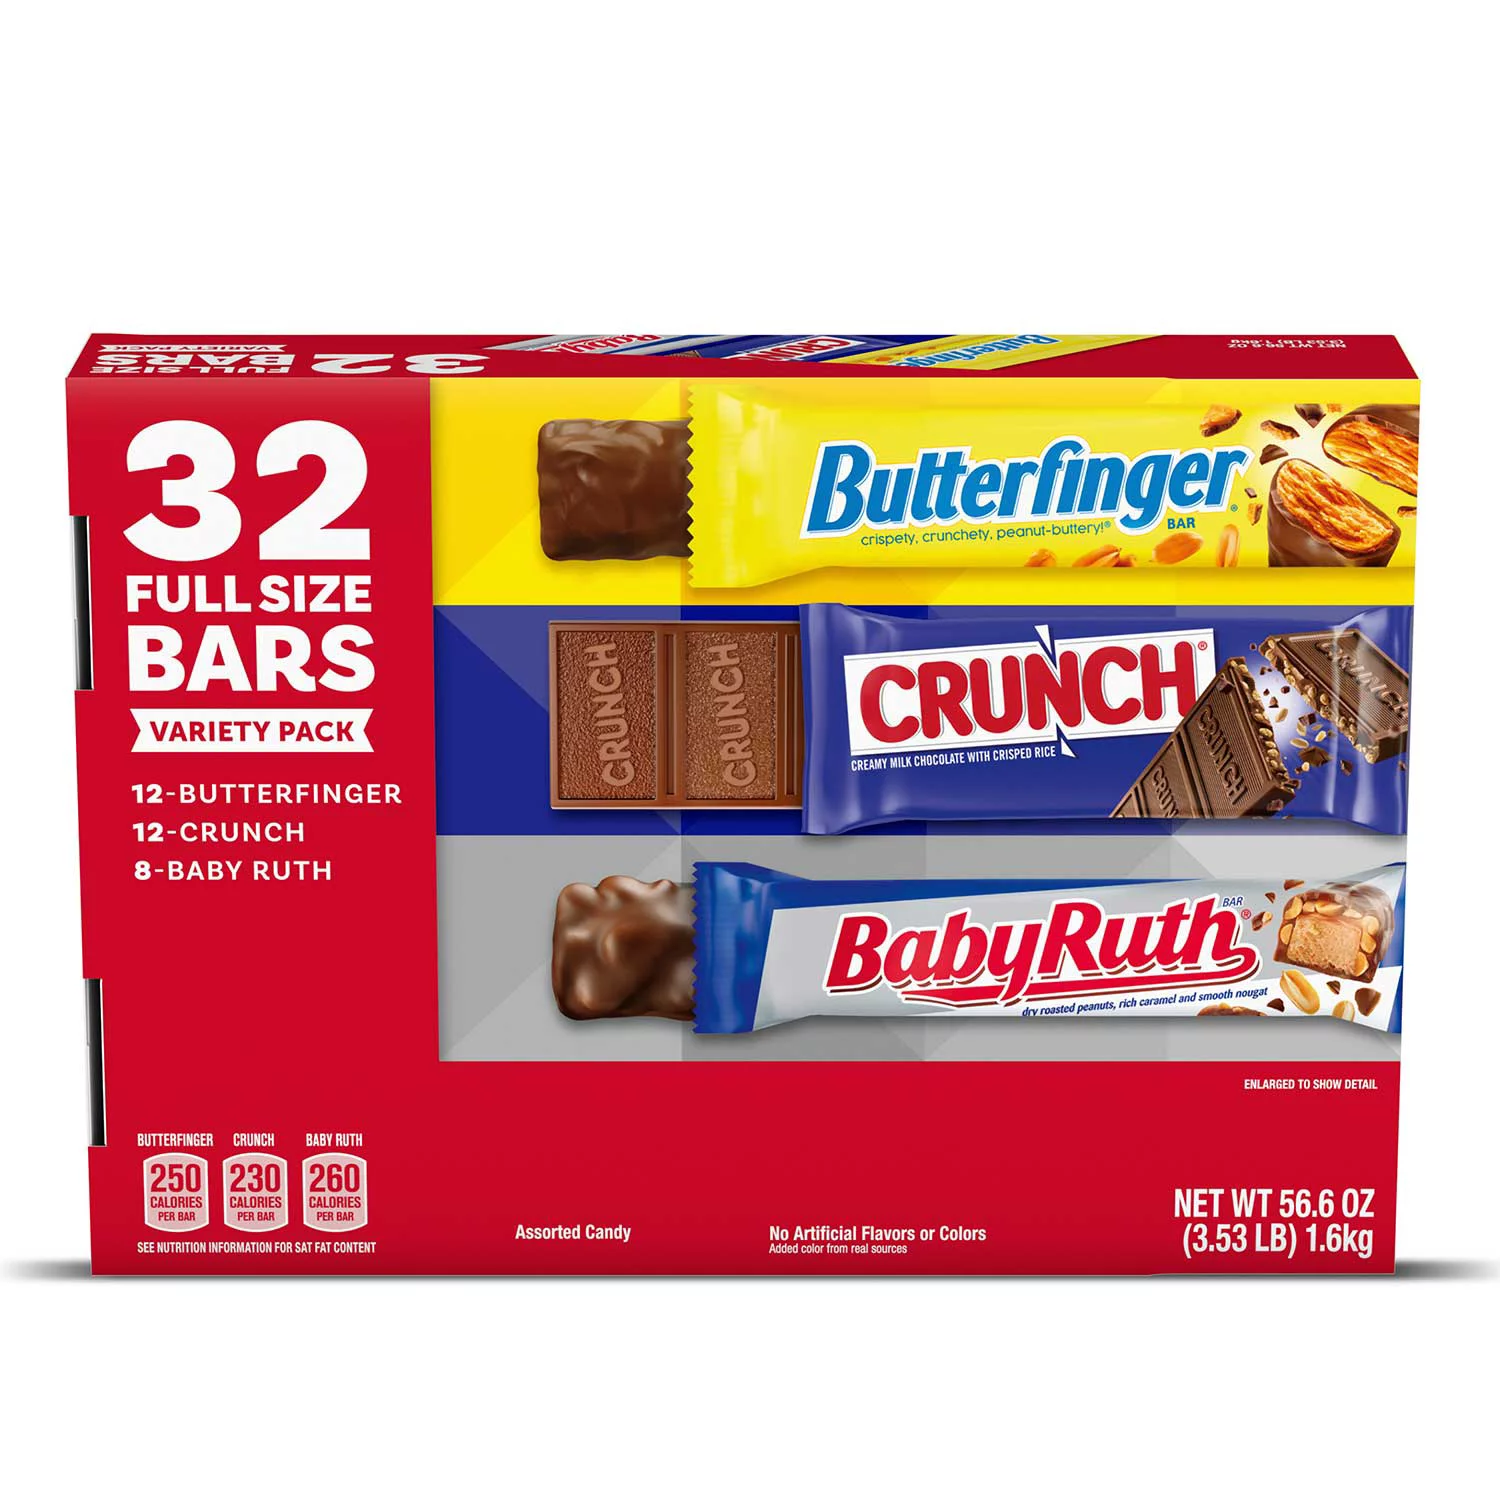 Crunch Butterfinger and BabyRuth Chocolate Bar Variety Pack (32 ct.)